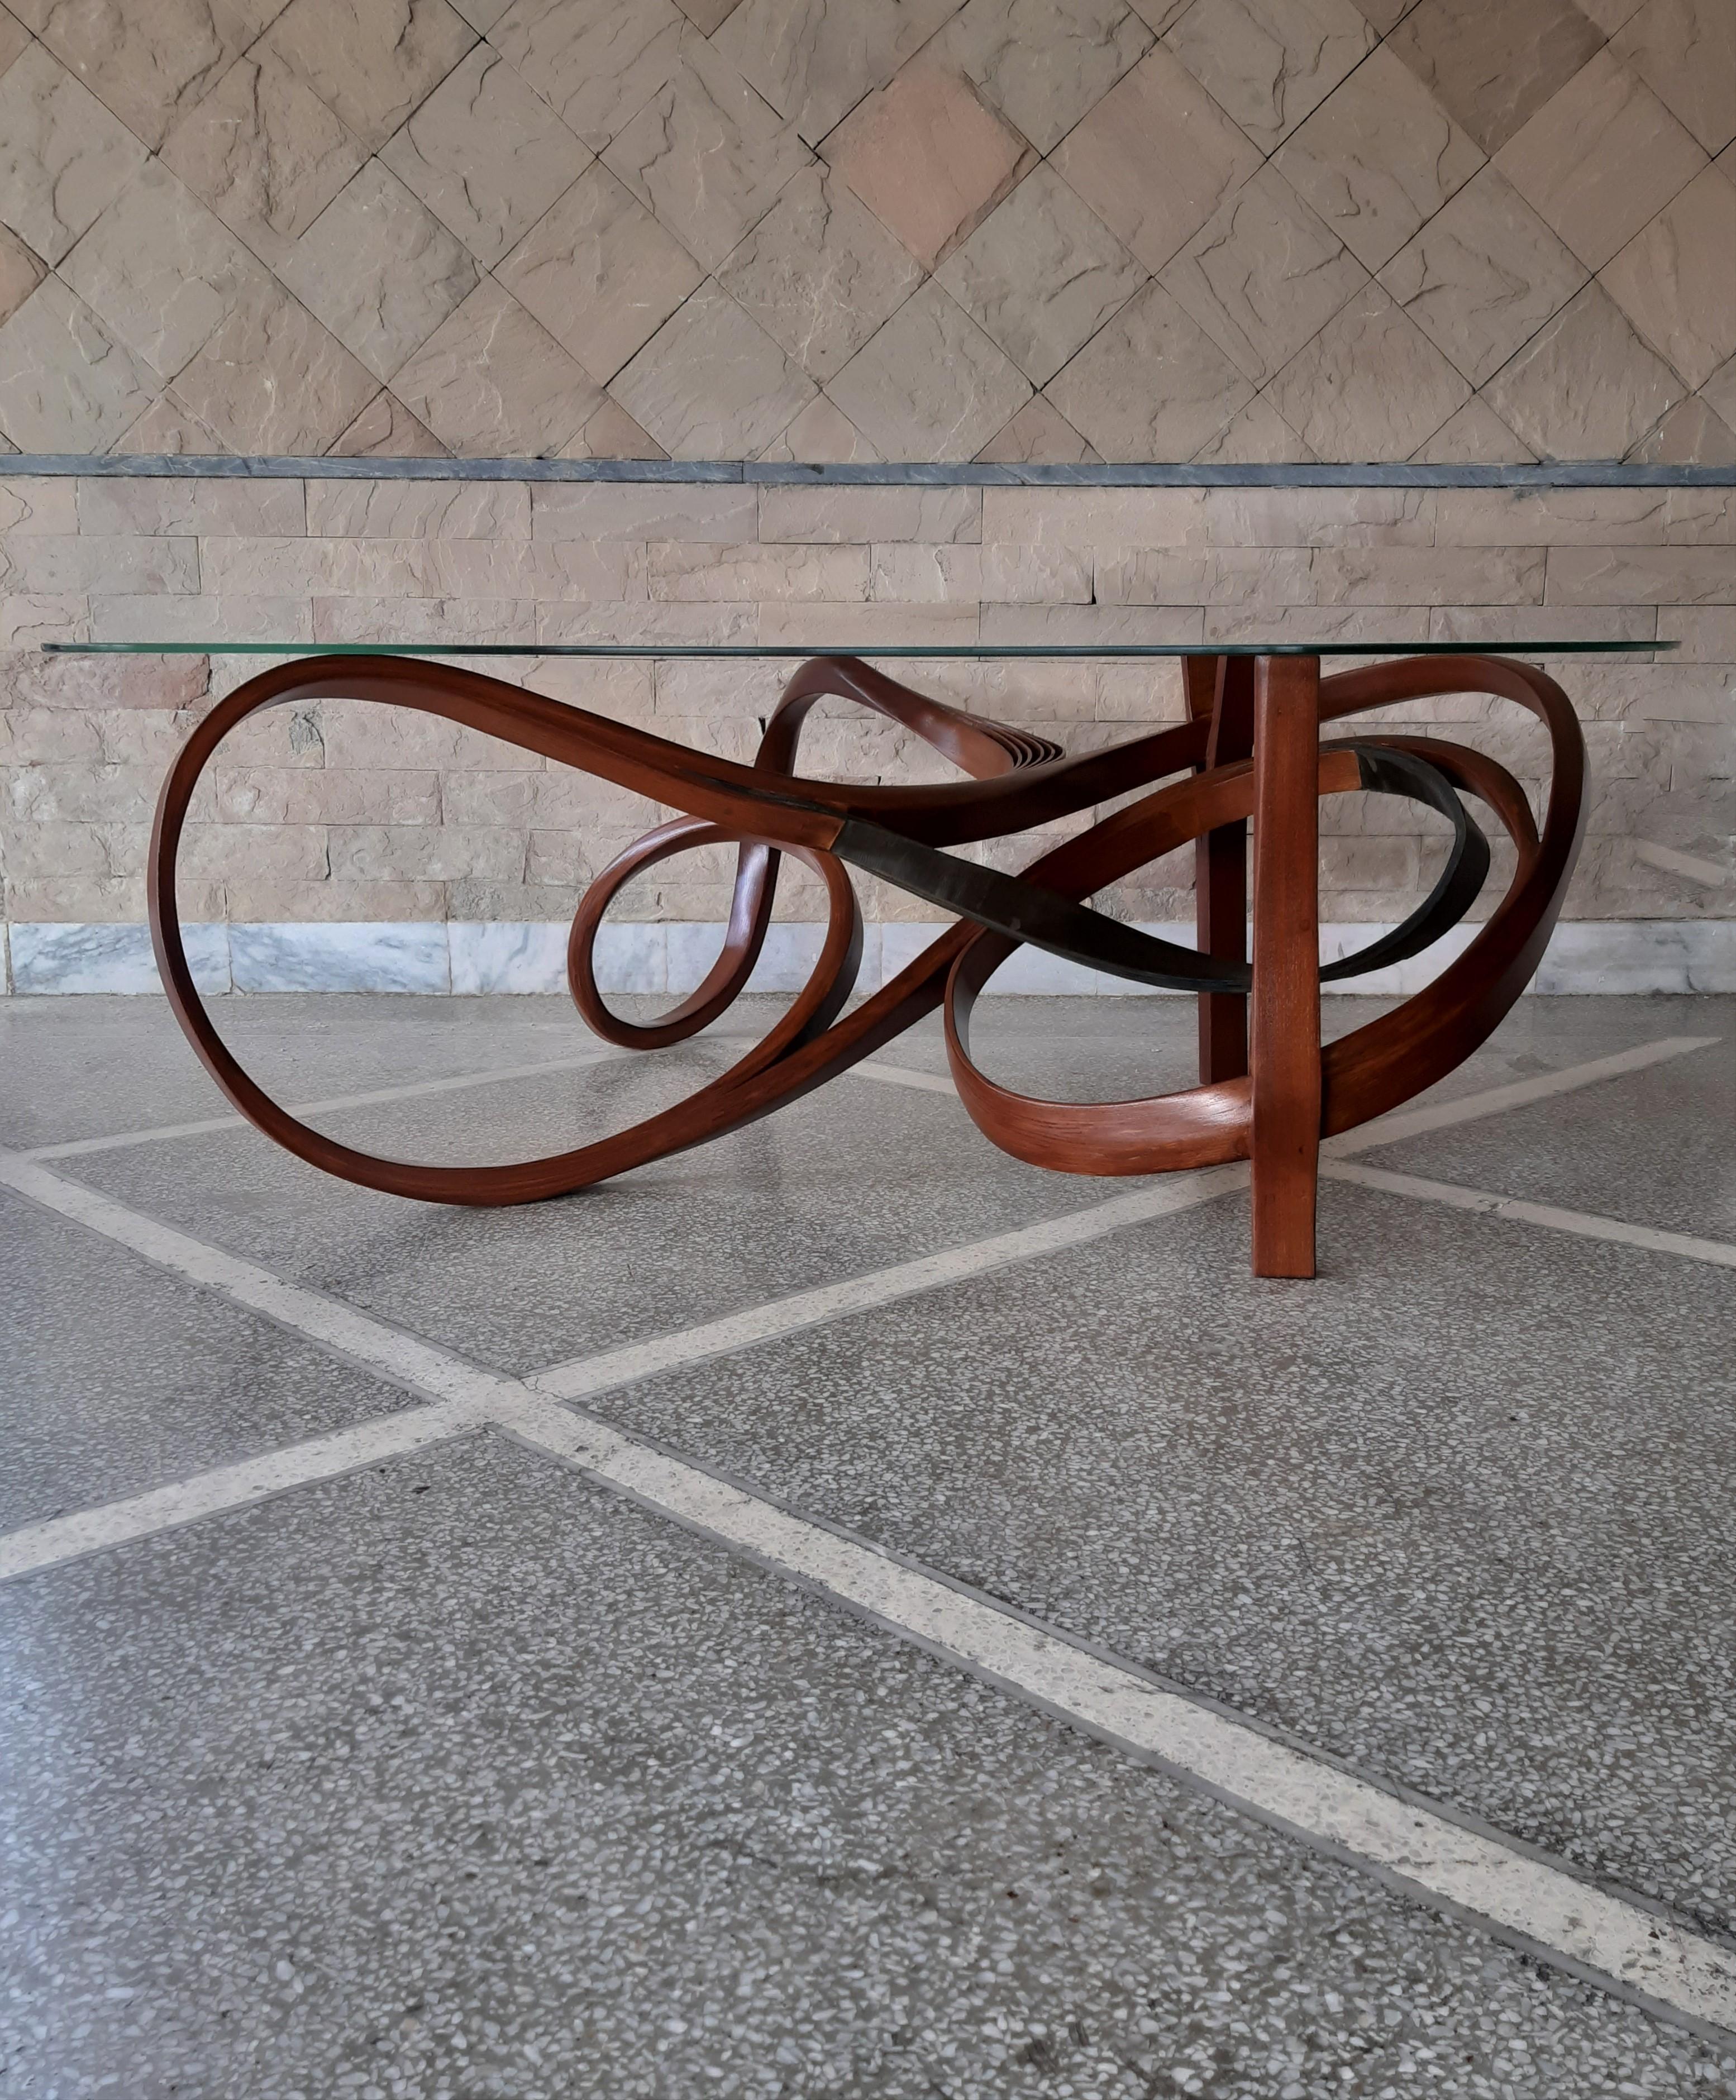 Organic Modern Centre Table No. 7 - Vrksa Series by Raka Studio made in Ash Wood and Leather For Sale